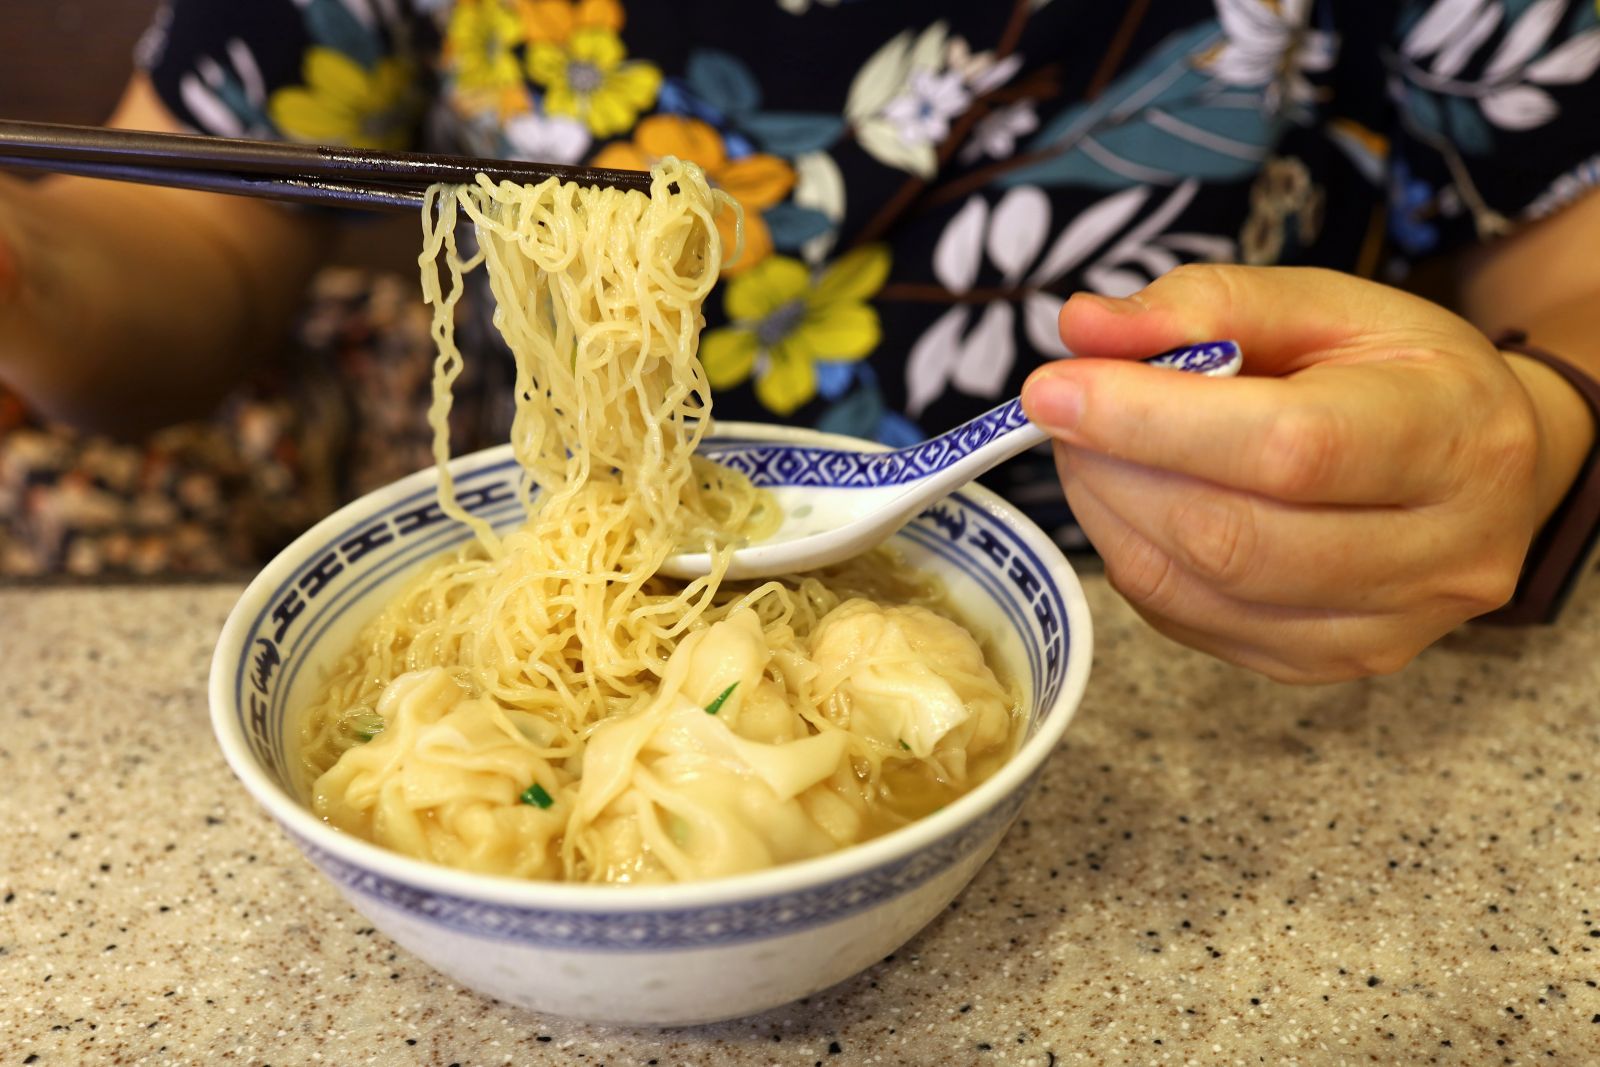 Chewy noodles are always placed on top of wontons to prevent them soak too long in the soup